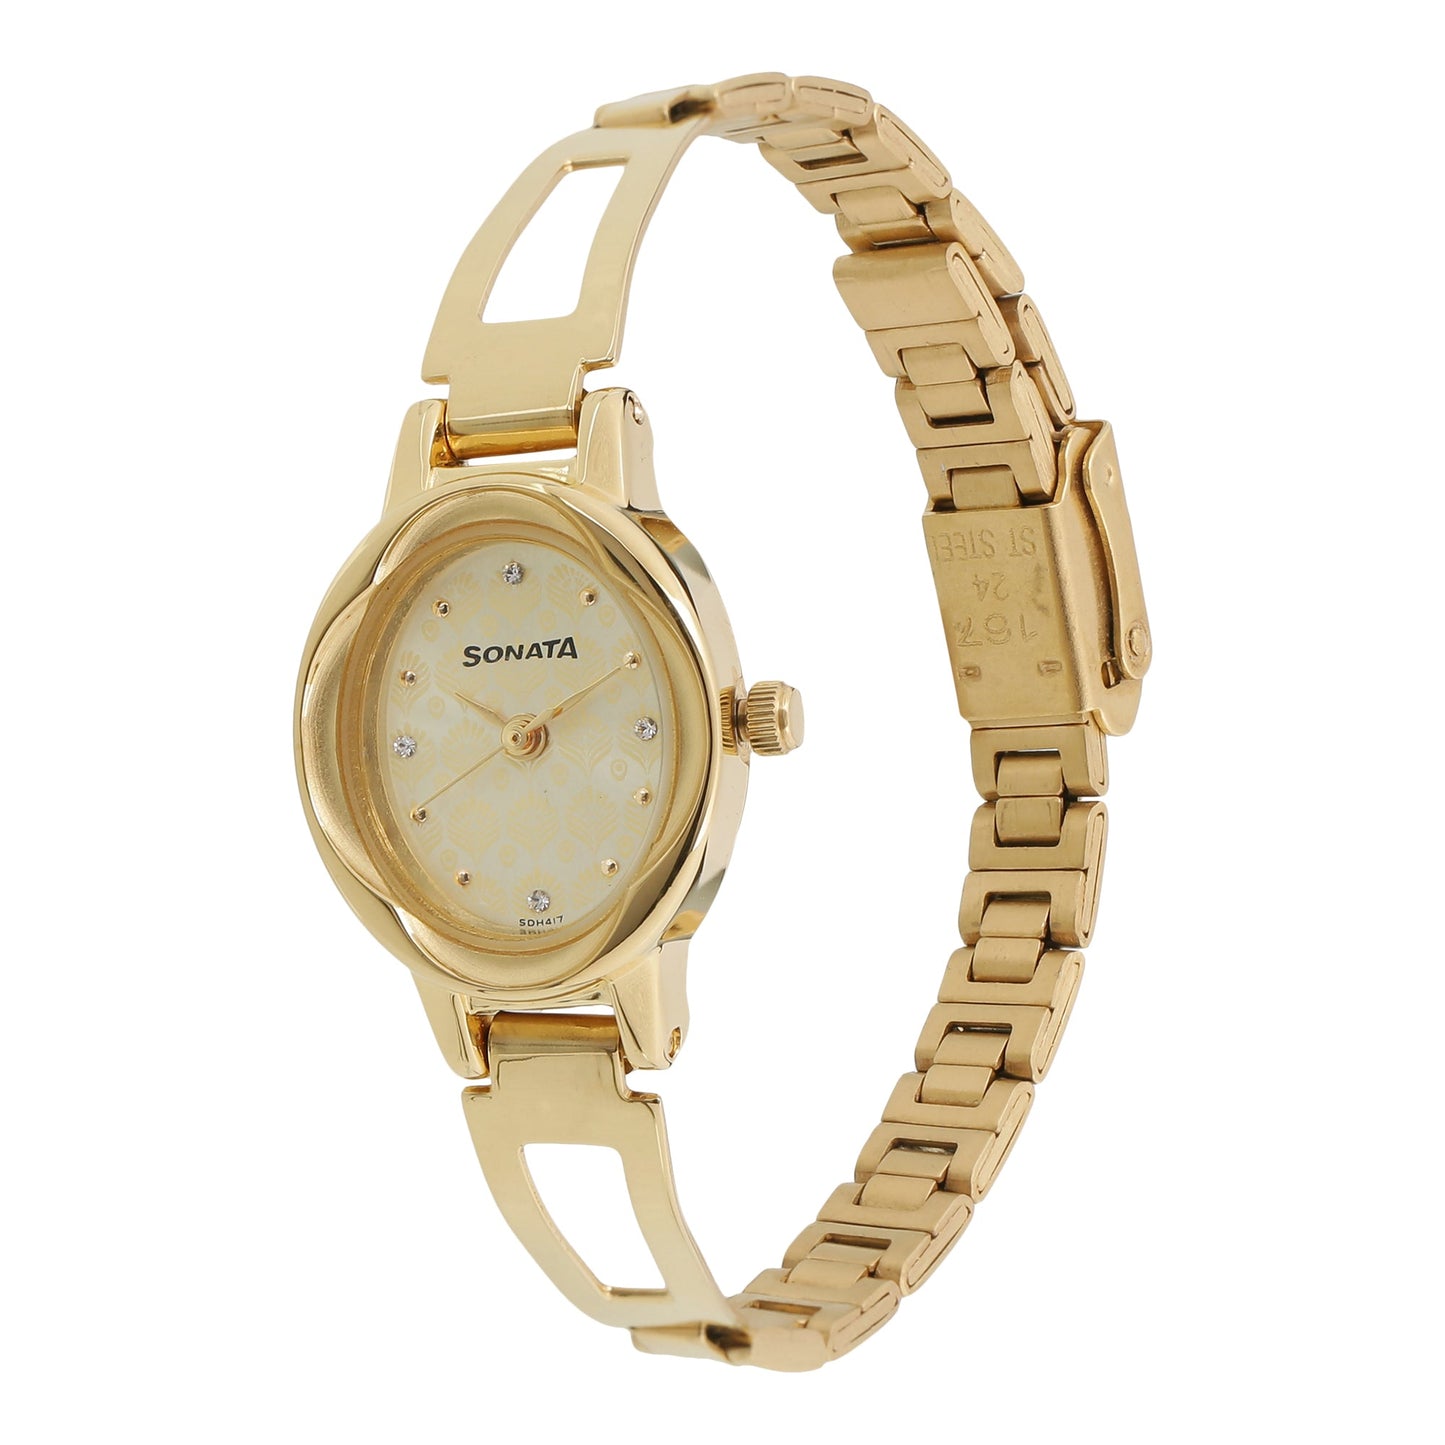 Sonata Pankh Champagne Dial Women Watch With Stainless Steel Strap